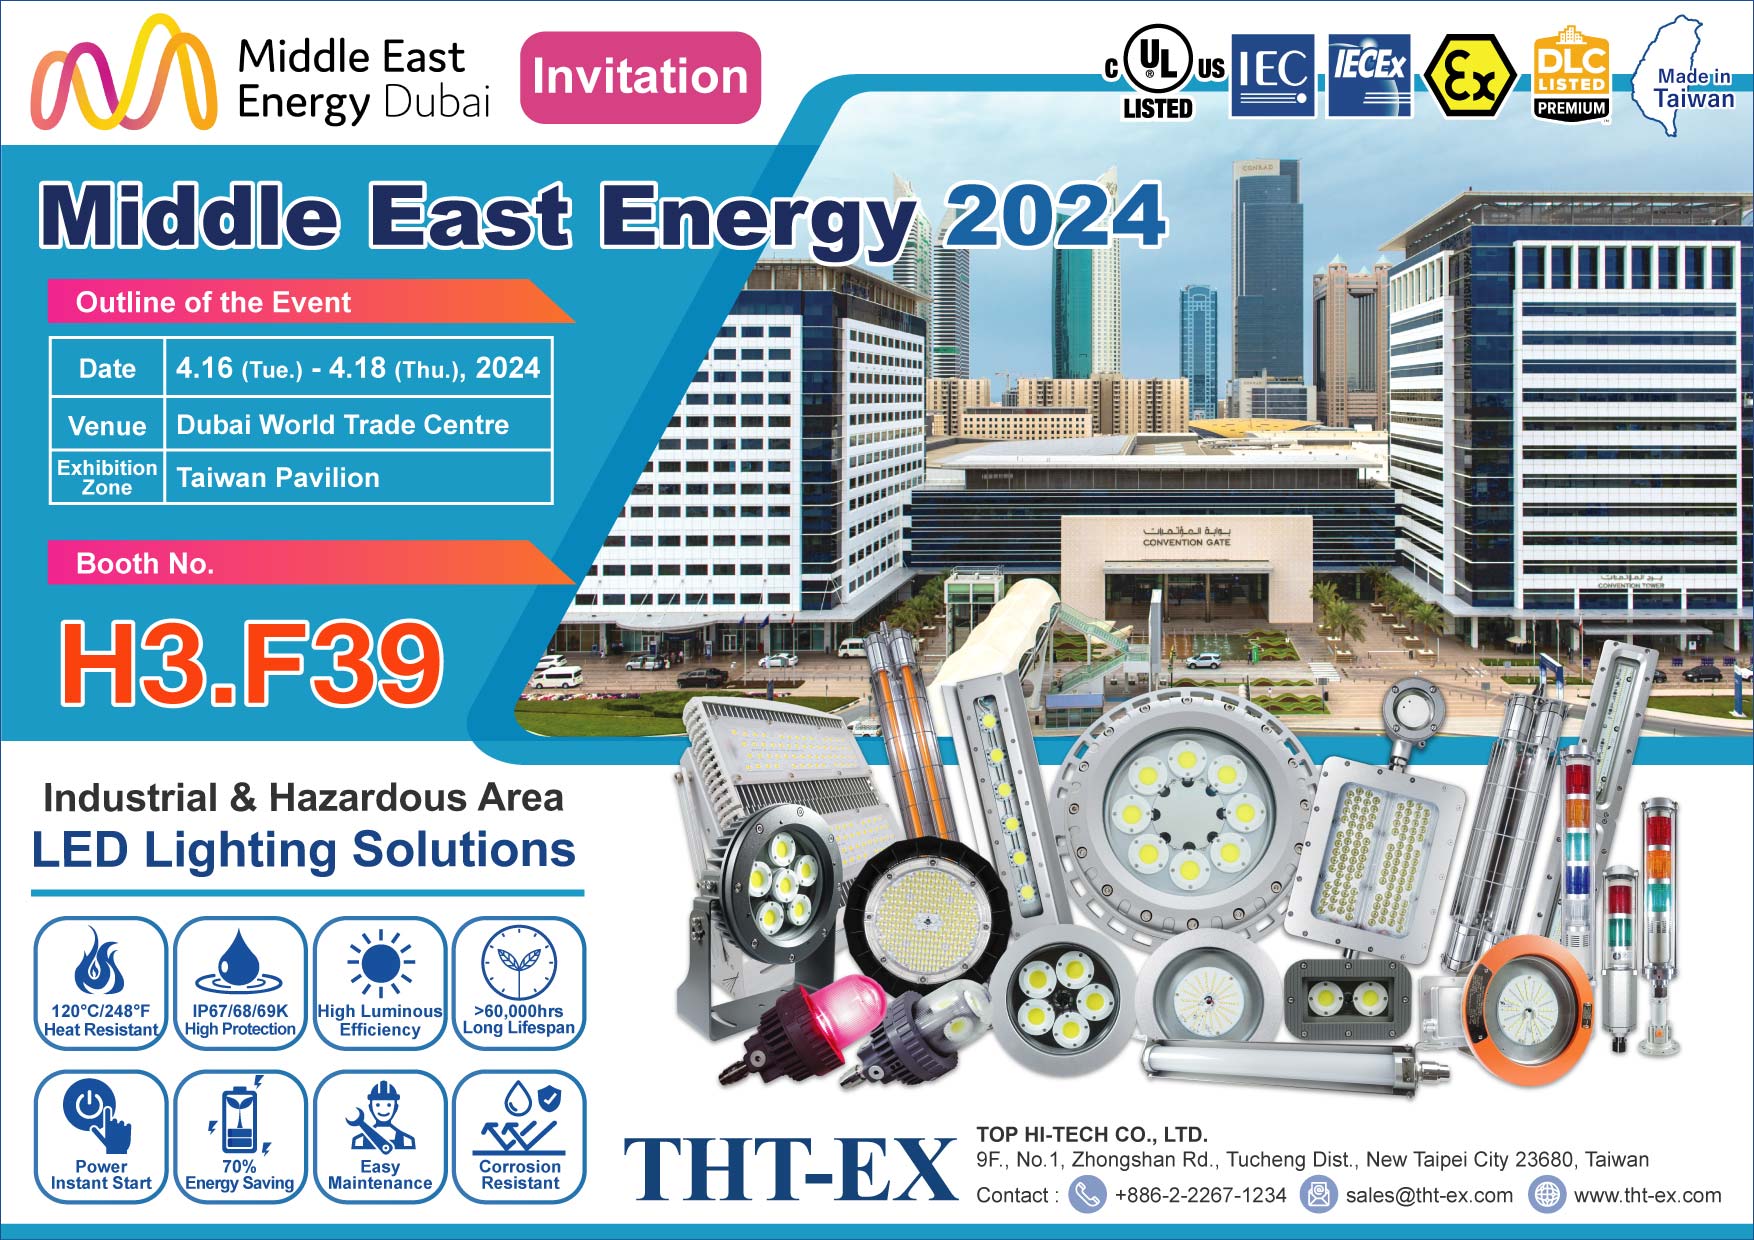 Join Us at Middle East Energy 2024: Explore Innovations with THT-EX (Booth No. H3.F39)